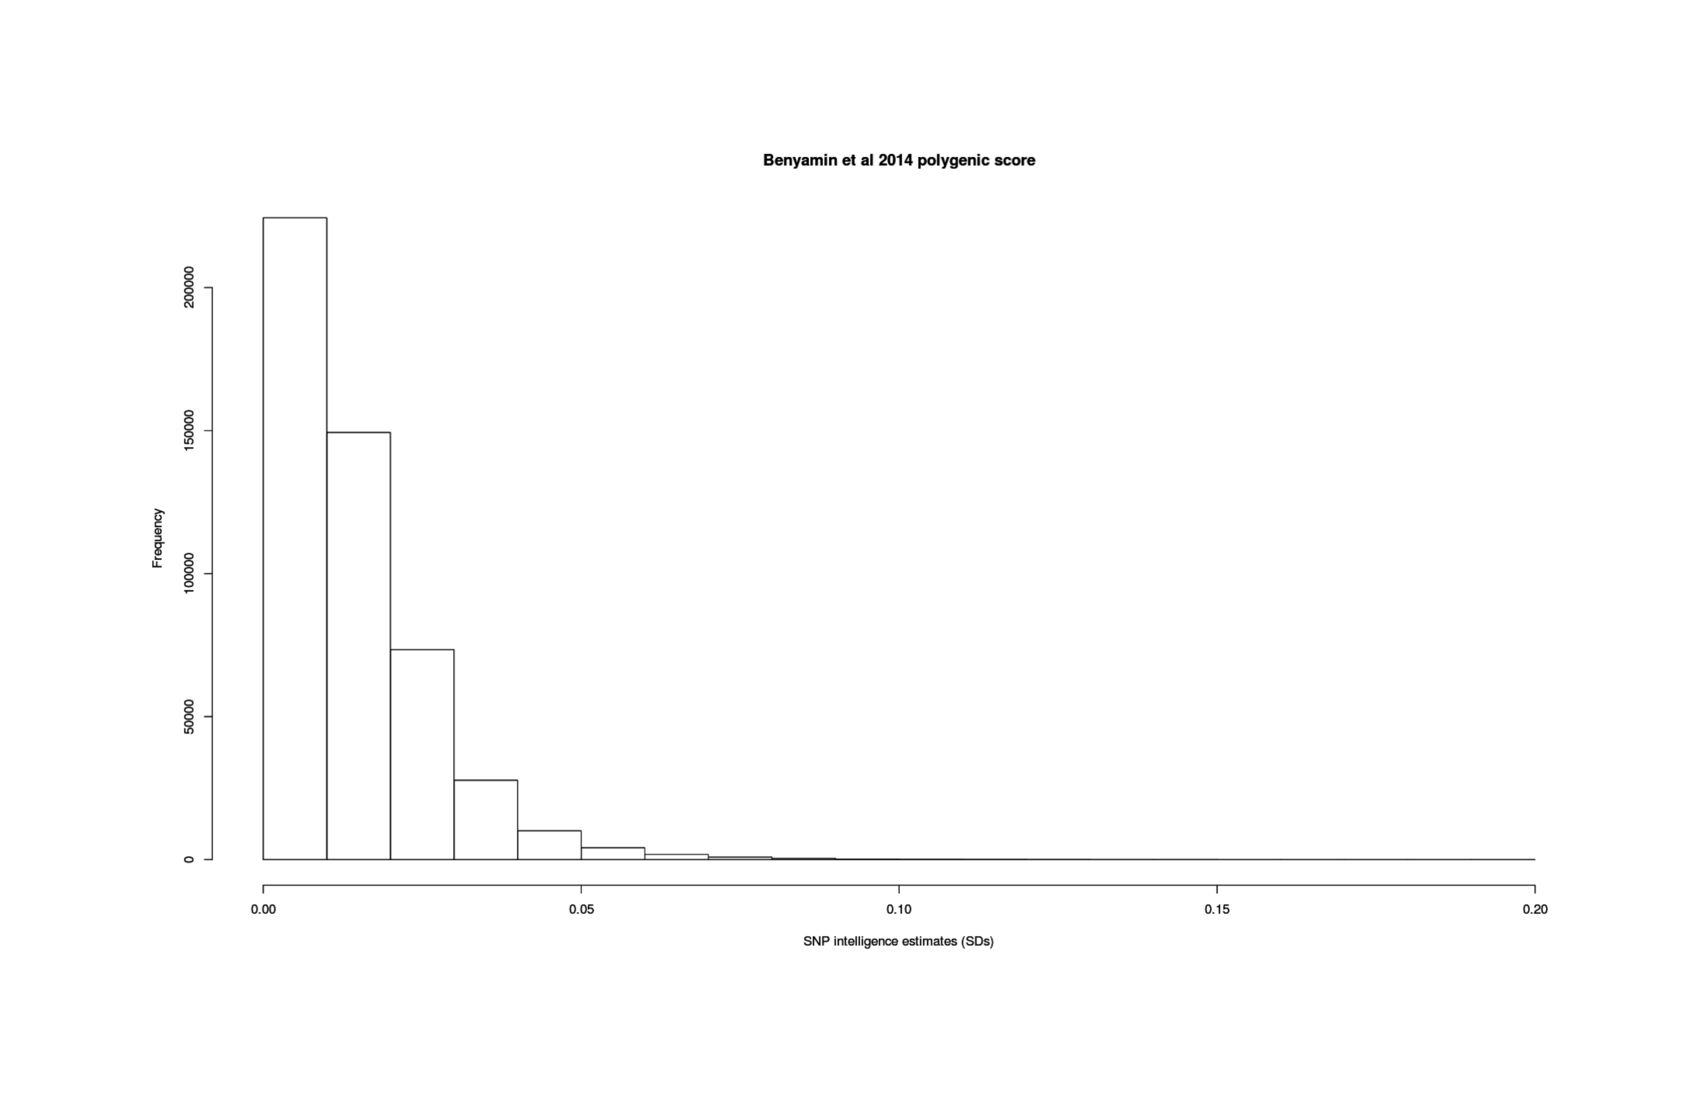 The betas/effect-sizes of the Benyamin et al 2014 polygenic score for intelligence, illustrating the many thousands of variants available for selection on.